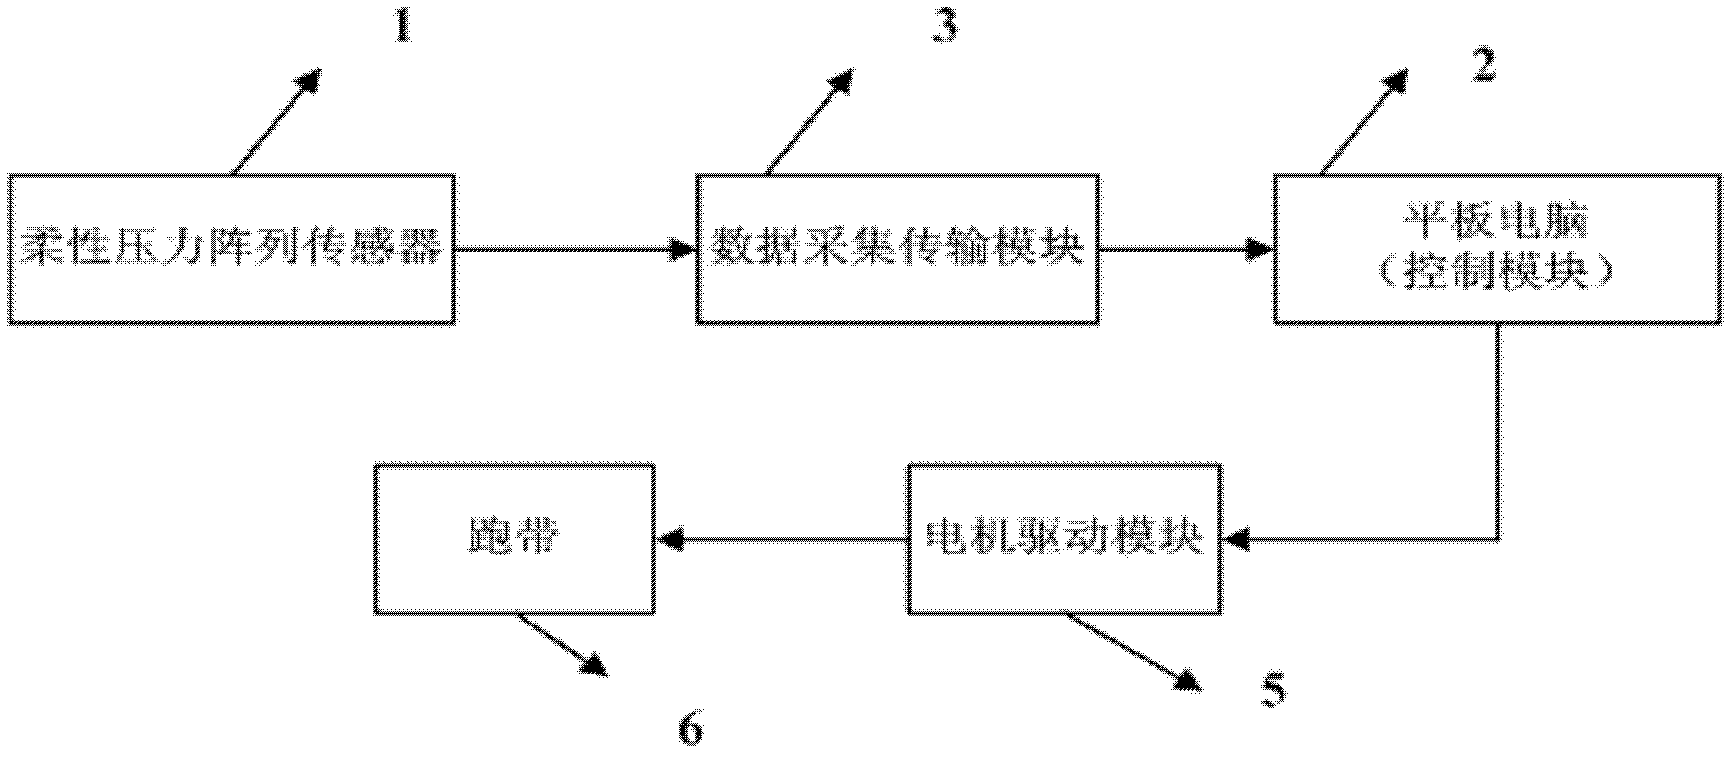 Self-adaptive speed regulation system of running device based on flexible array pressure transducer